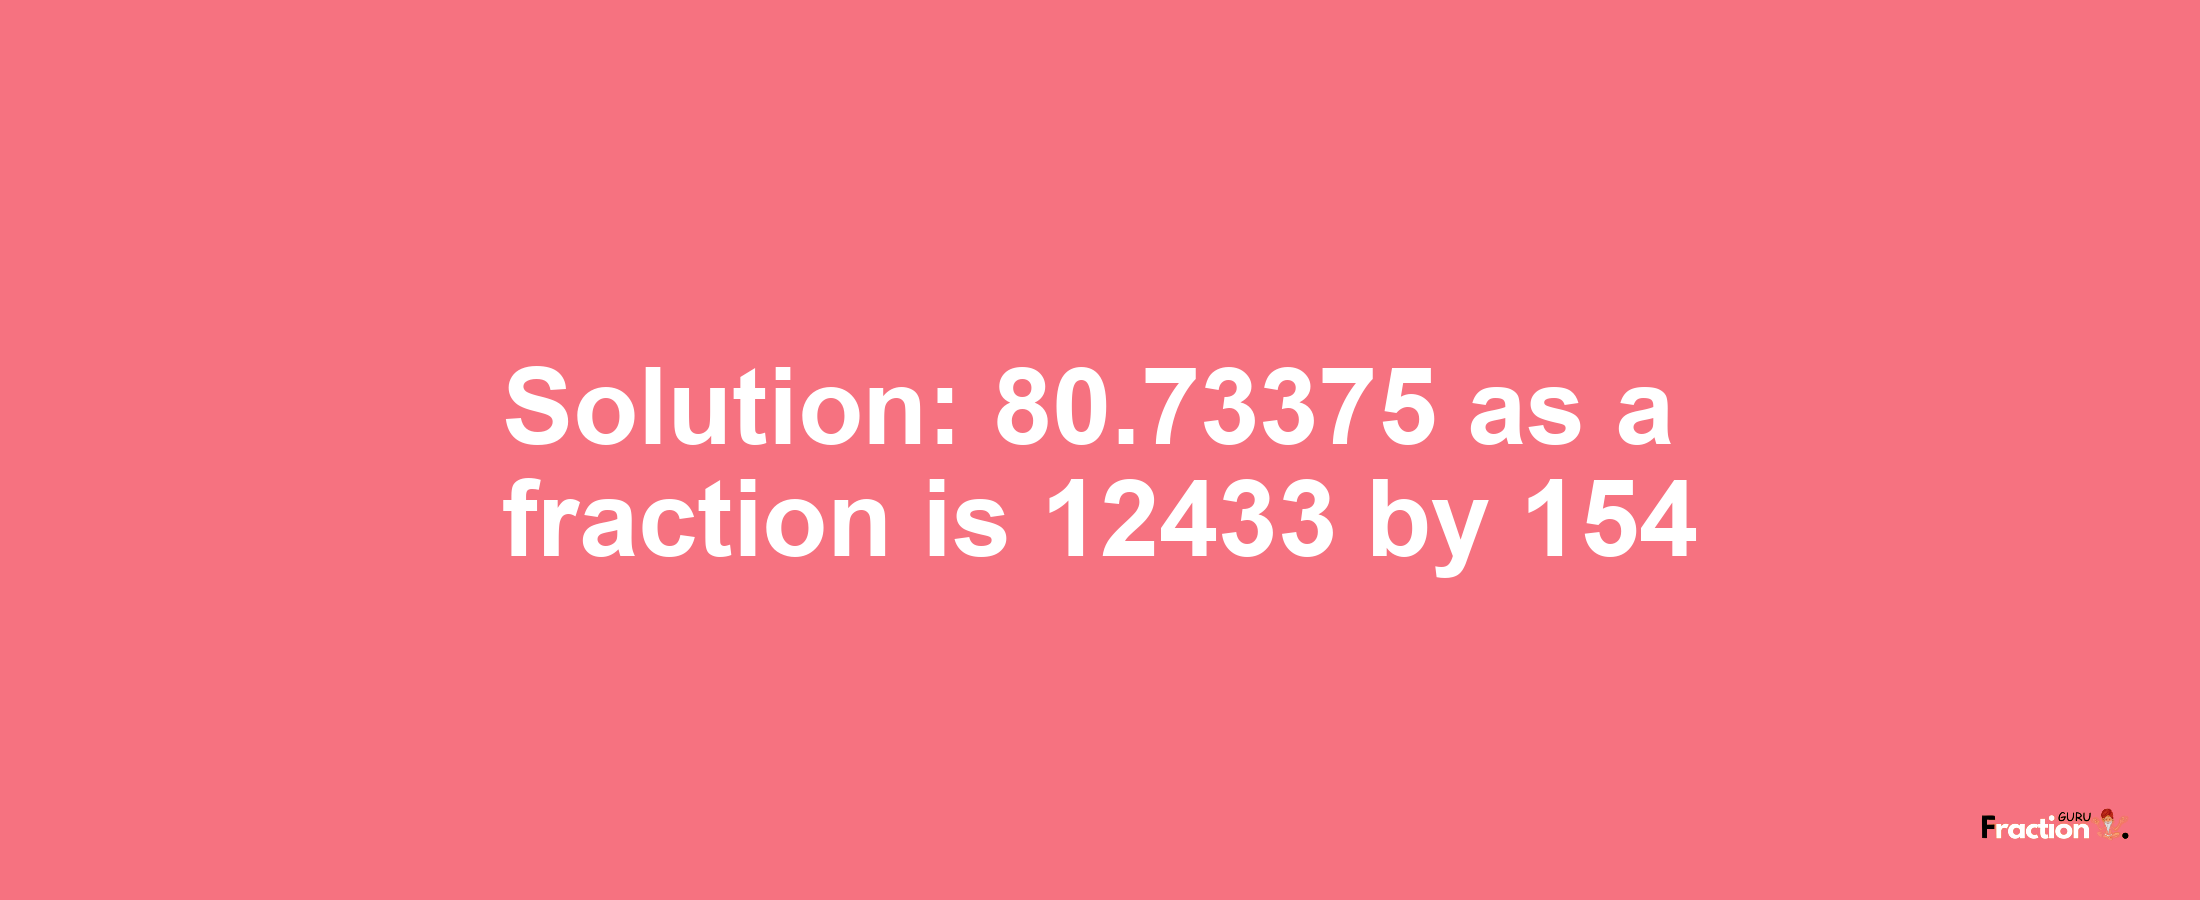 Solution:80.73375 as a fraction is 12433/154